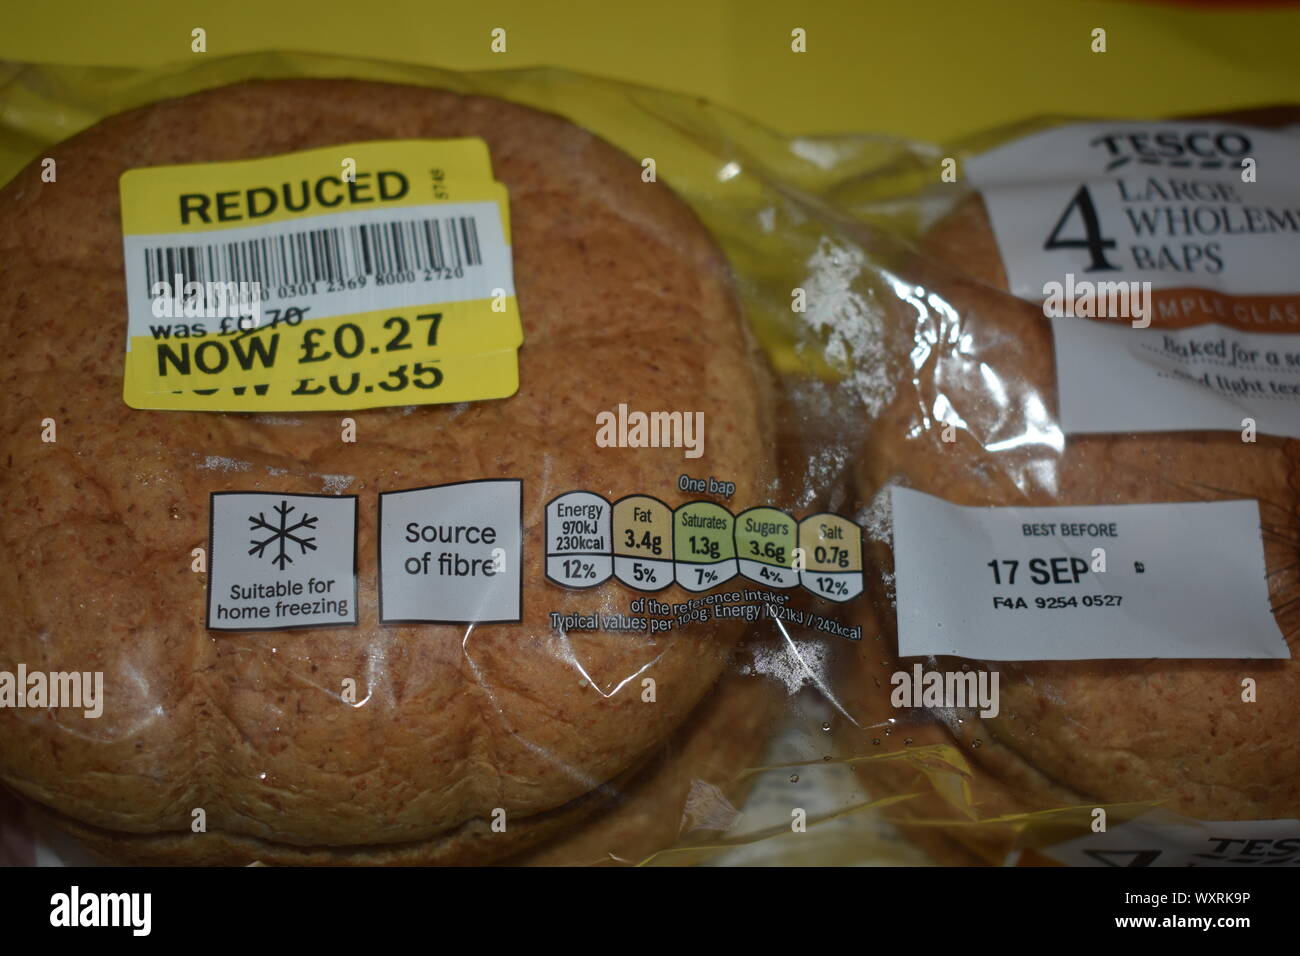 4 Wholemeal rolls double price reduction to 27p on a yellow and white background with the Tesco brand on it. Stock Photo